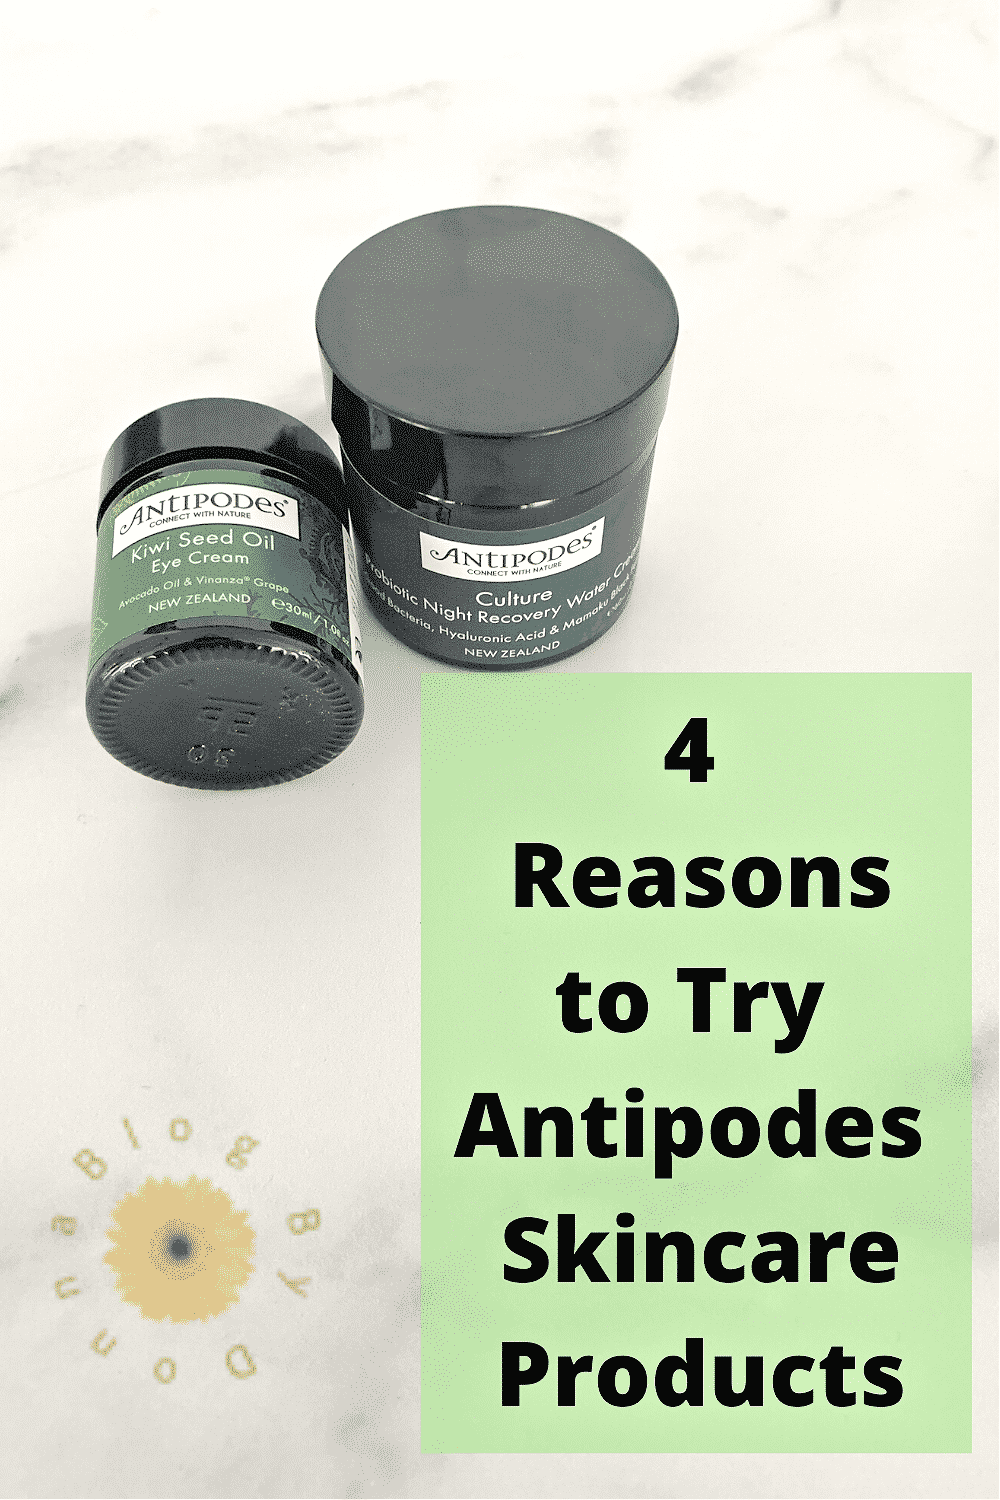 4 reasons to try Antipodes skin care products